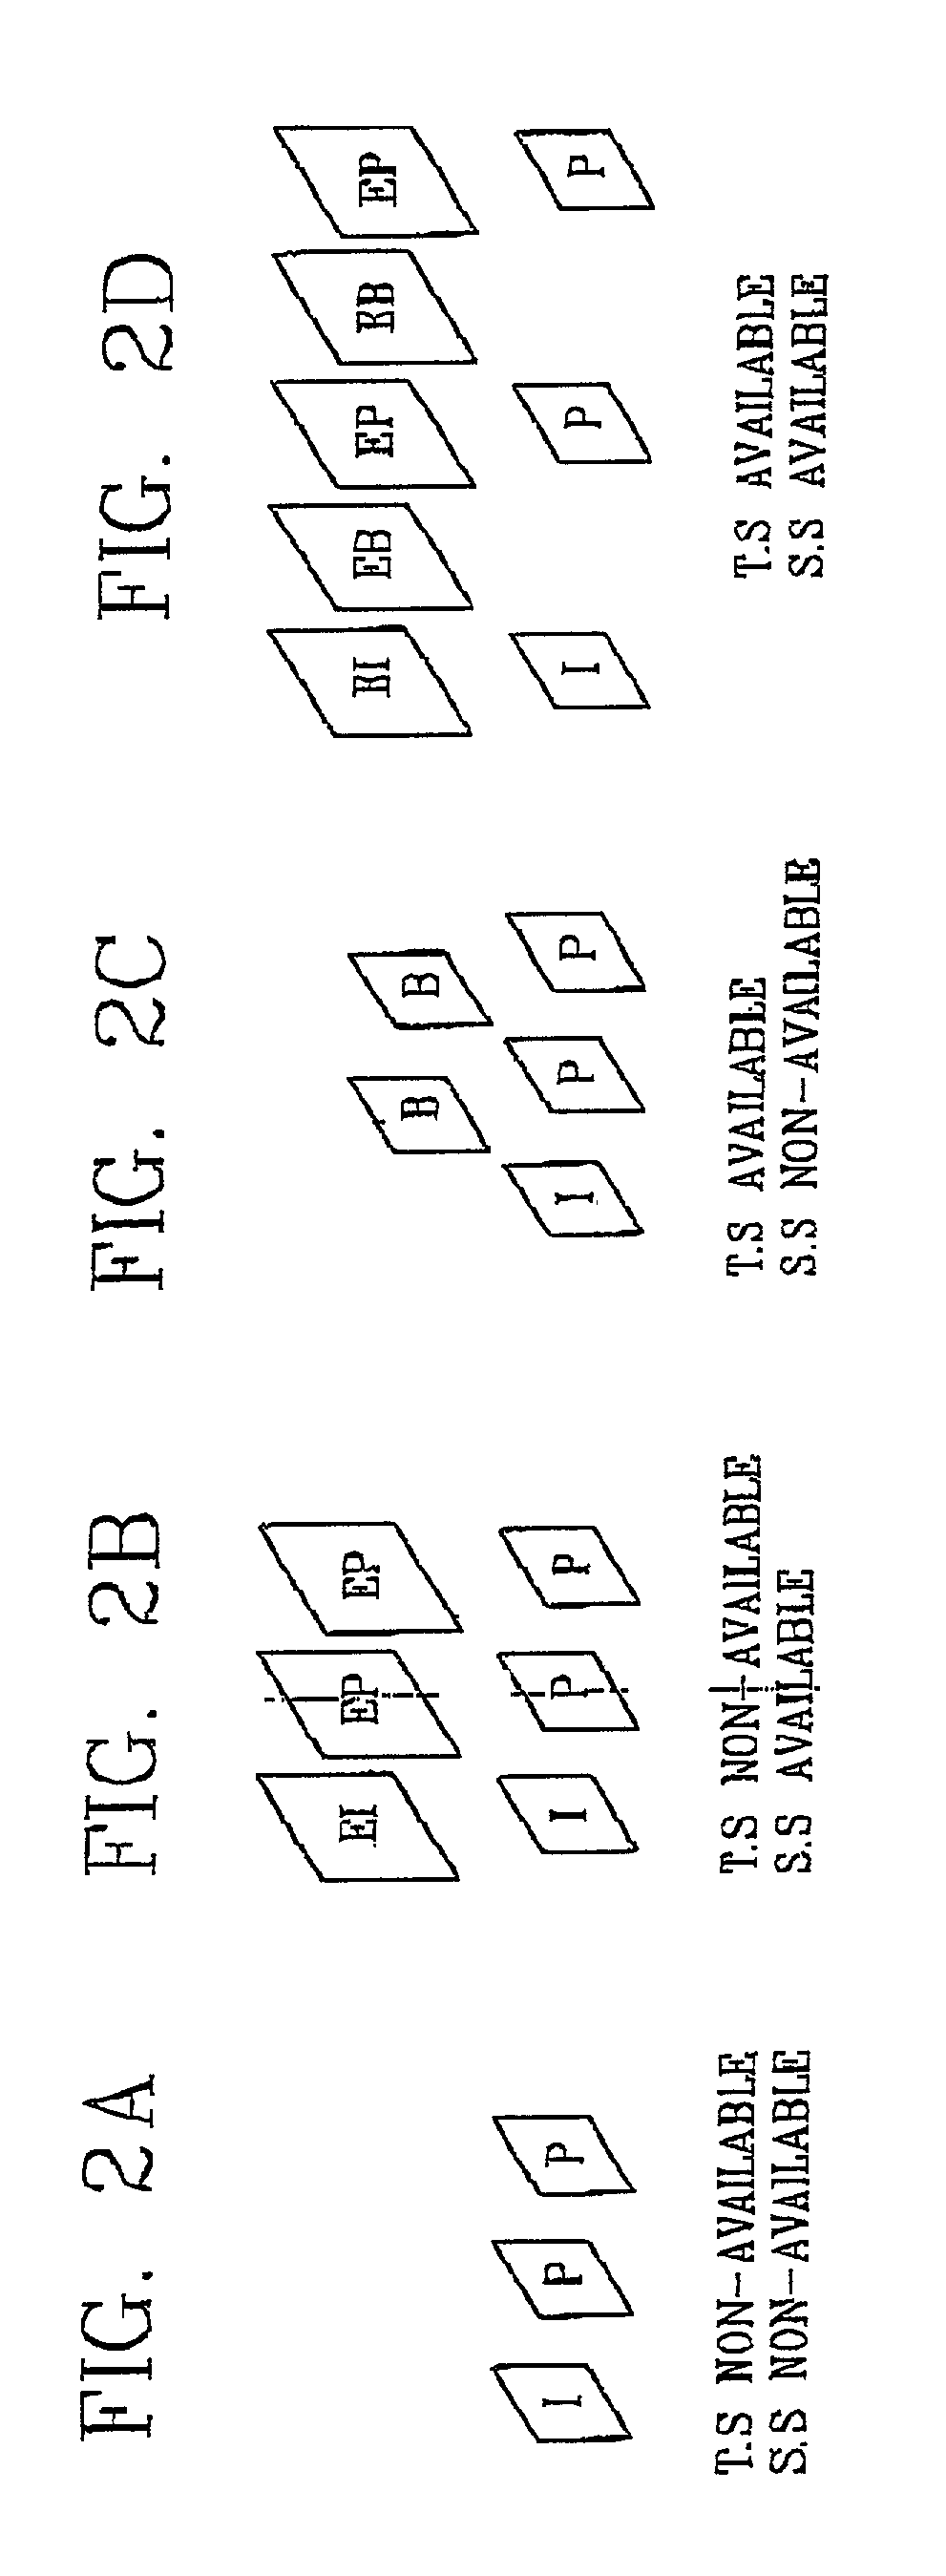 Spatio-temporal hybrid scalable video coding apparatus using subband decomposition and method